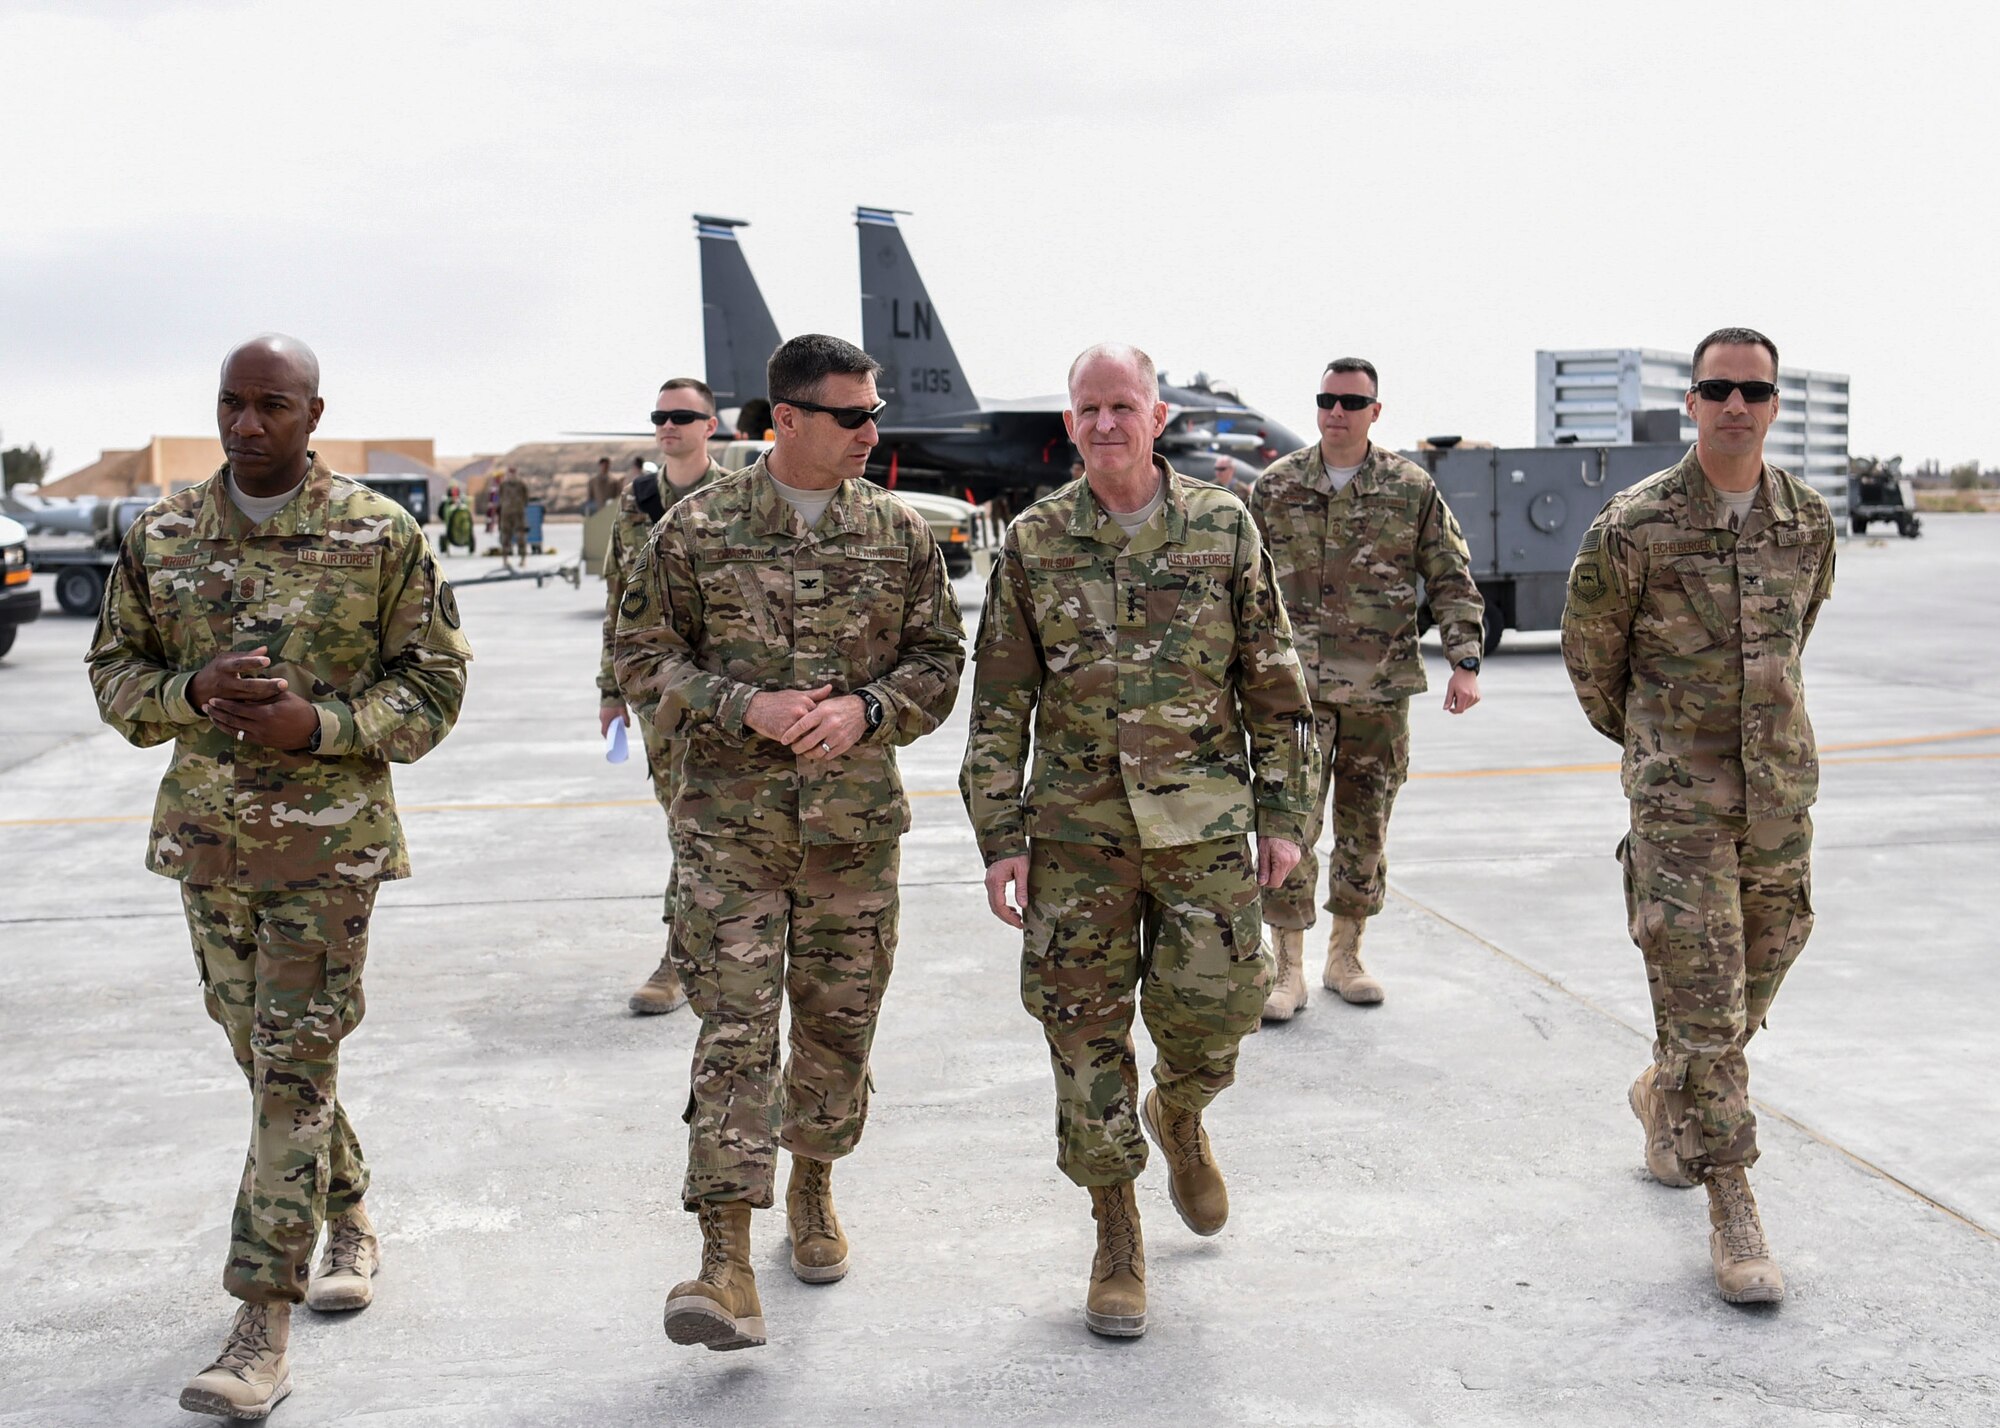 Air Force Vice Chief of Staff Gen. Stephen W. Wilson and Chief Master Sgt. of the Air Force Kaleth O. Wright receive a flight line tour during a visit April 10, 2017 in Southwest Asia. The CMSAF and VCSAF visited the 332nd Air Expeditionary Wing to hear from Airmen and educate themselves on the mission. (U. S. Air Force photo by Tech Sgt. Eboni Reams)